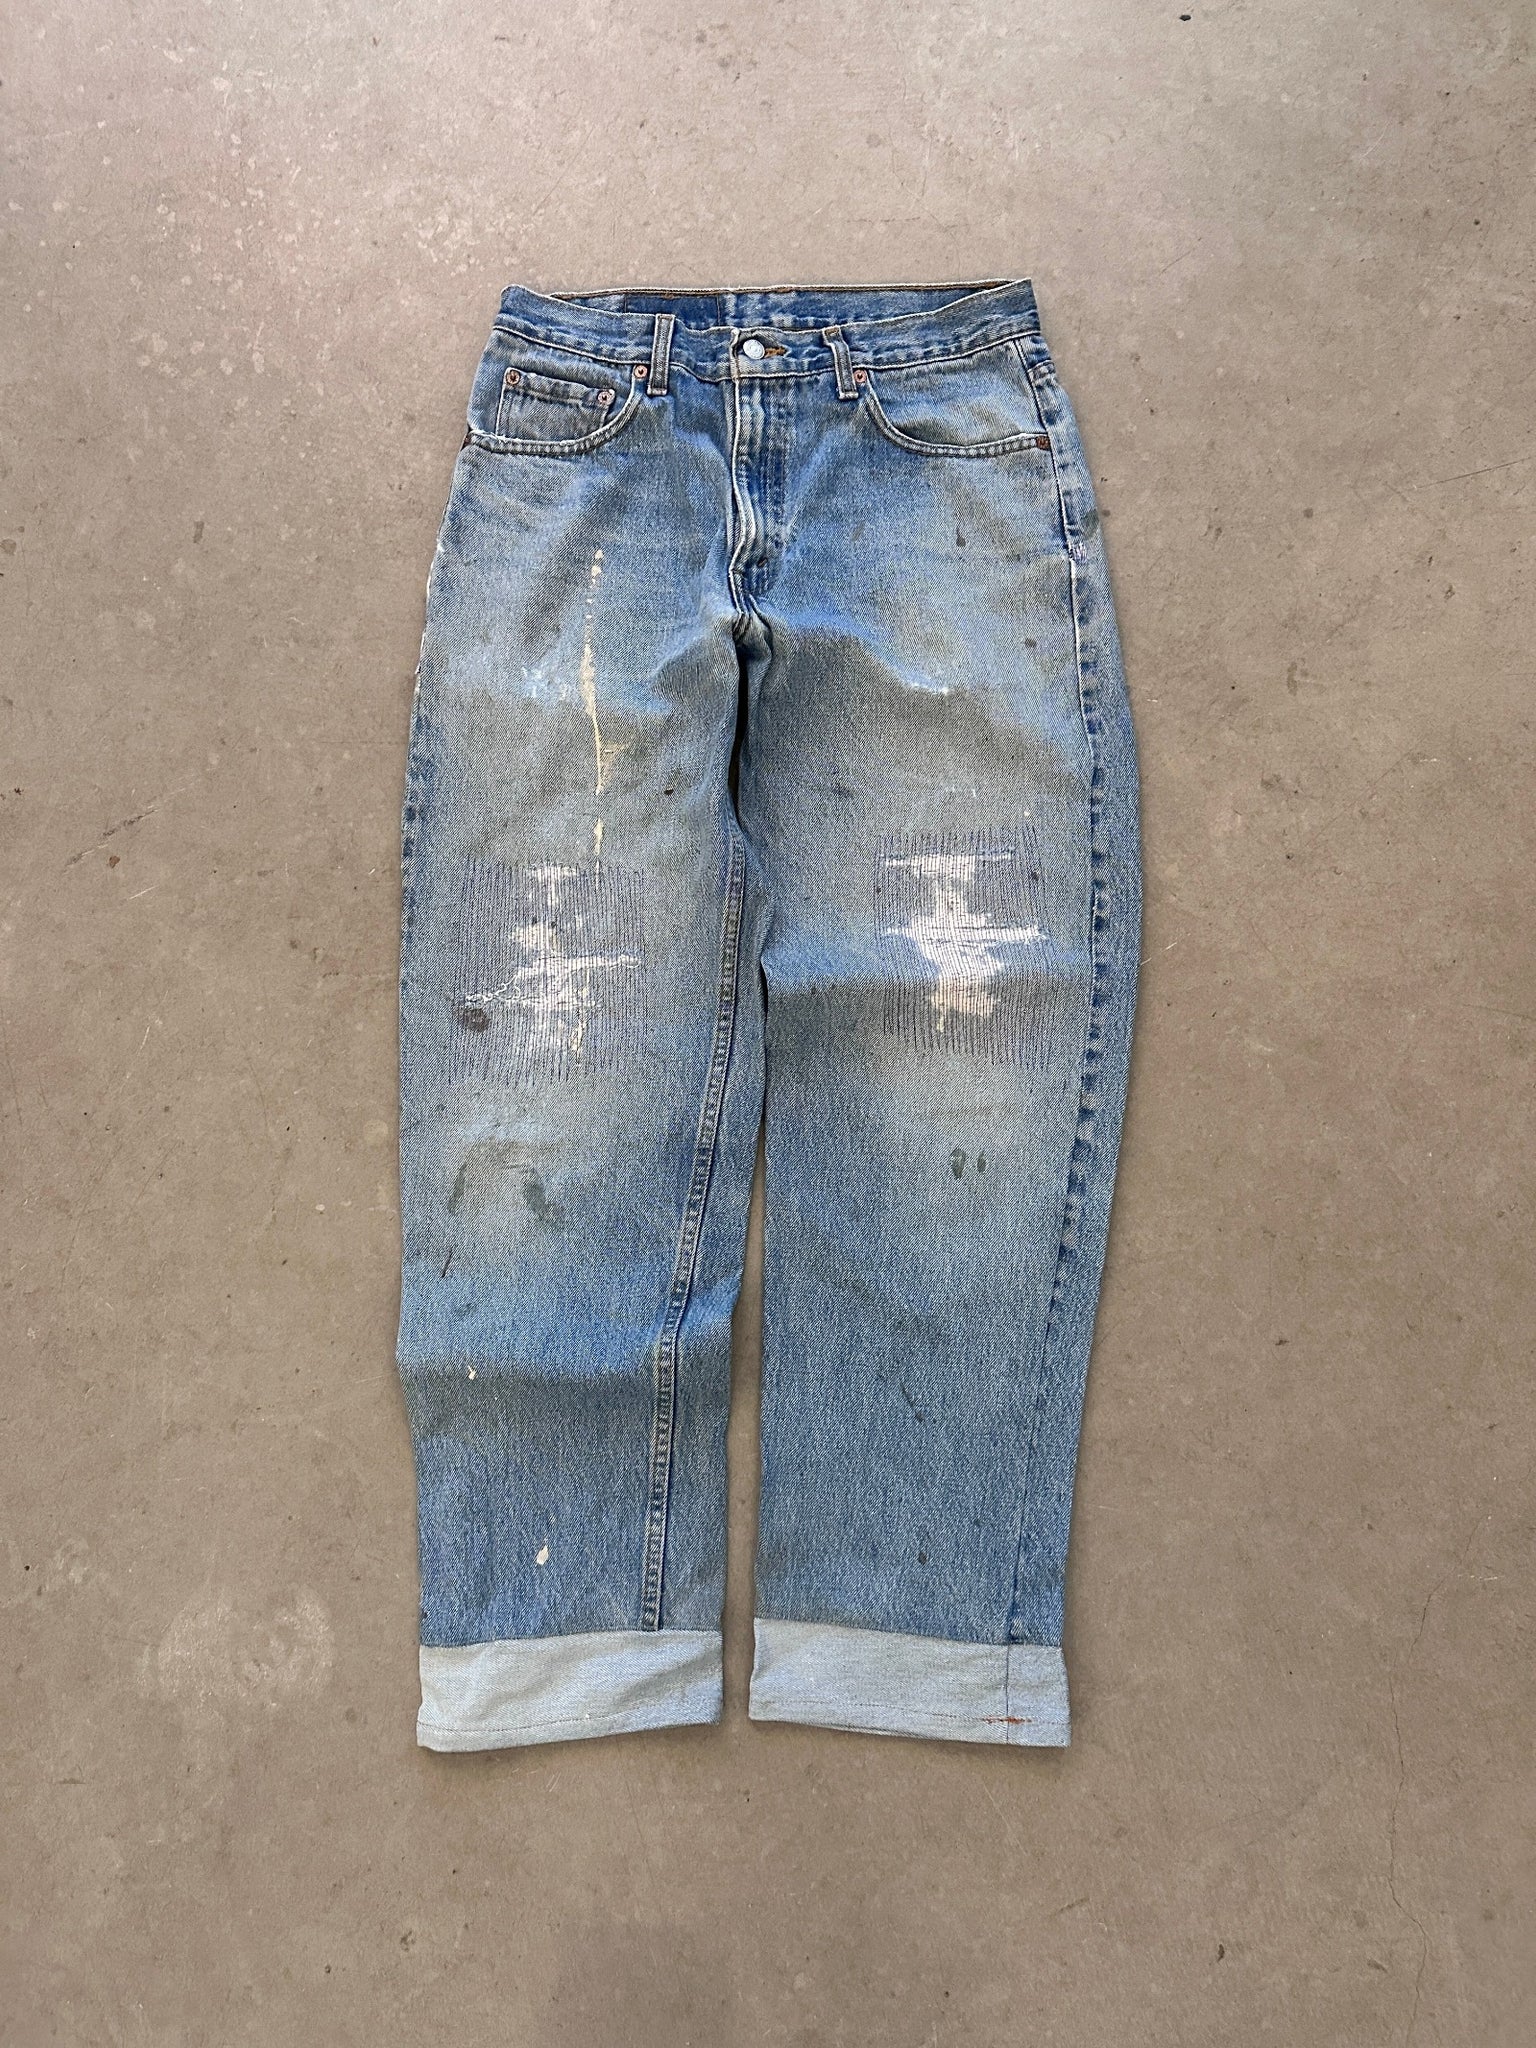 1990's Levi's 550 Repaired Jeans - 33 x 30